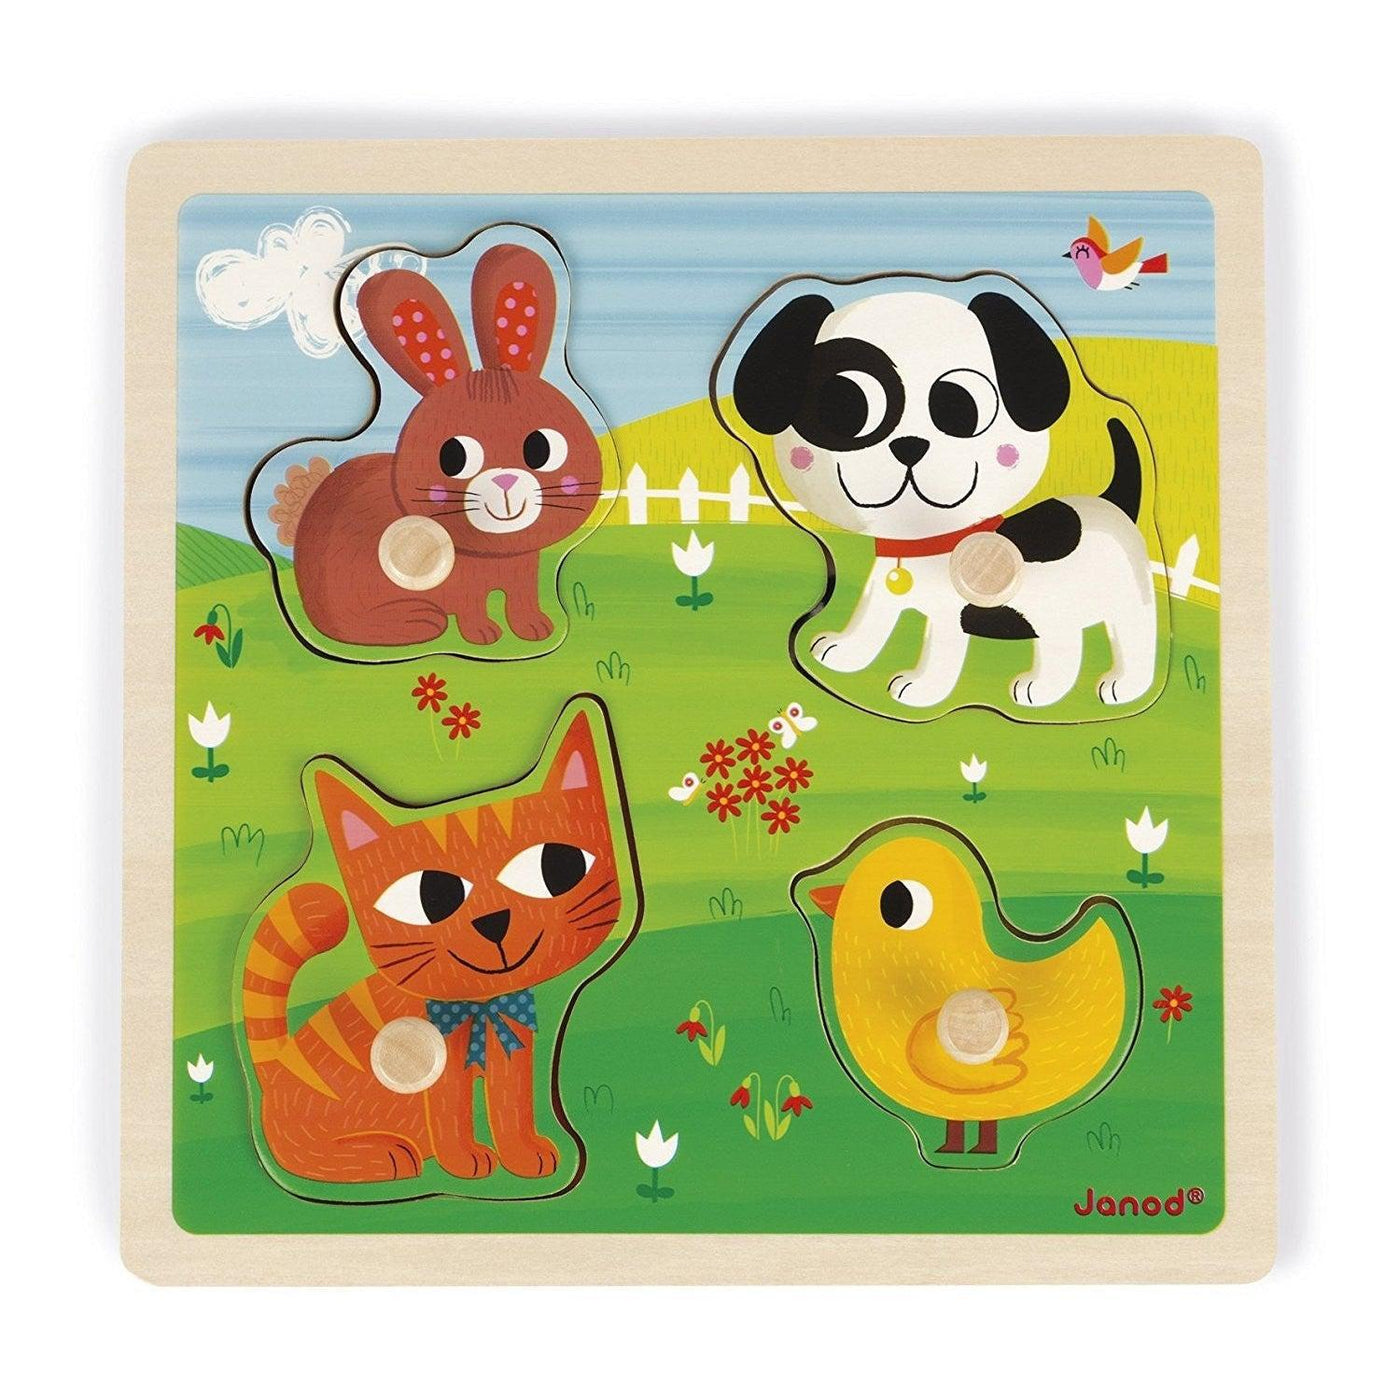 Tactile Wooden Peg Puzzle "My First Animals"